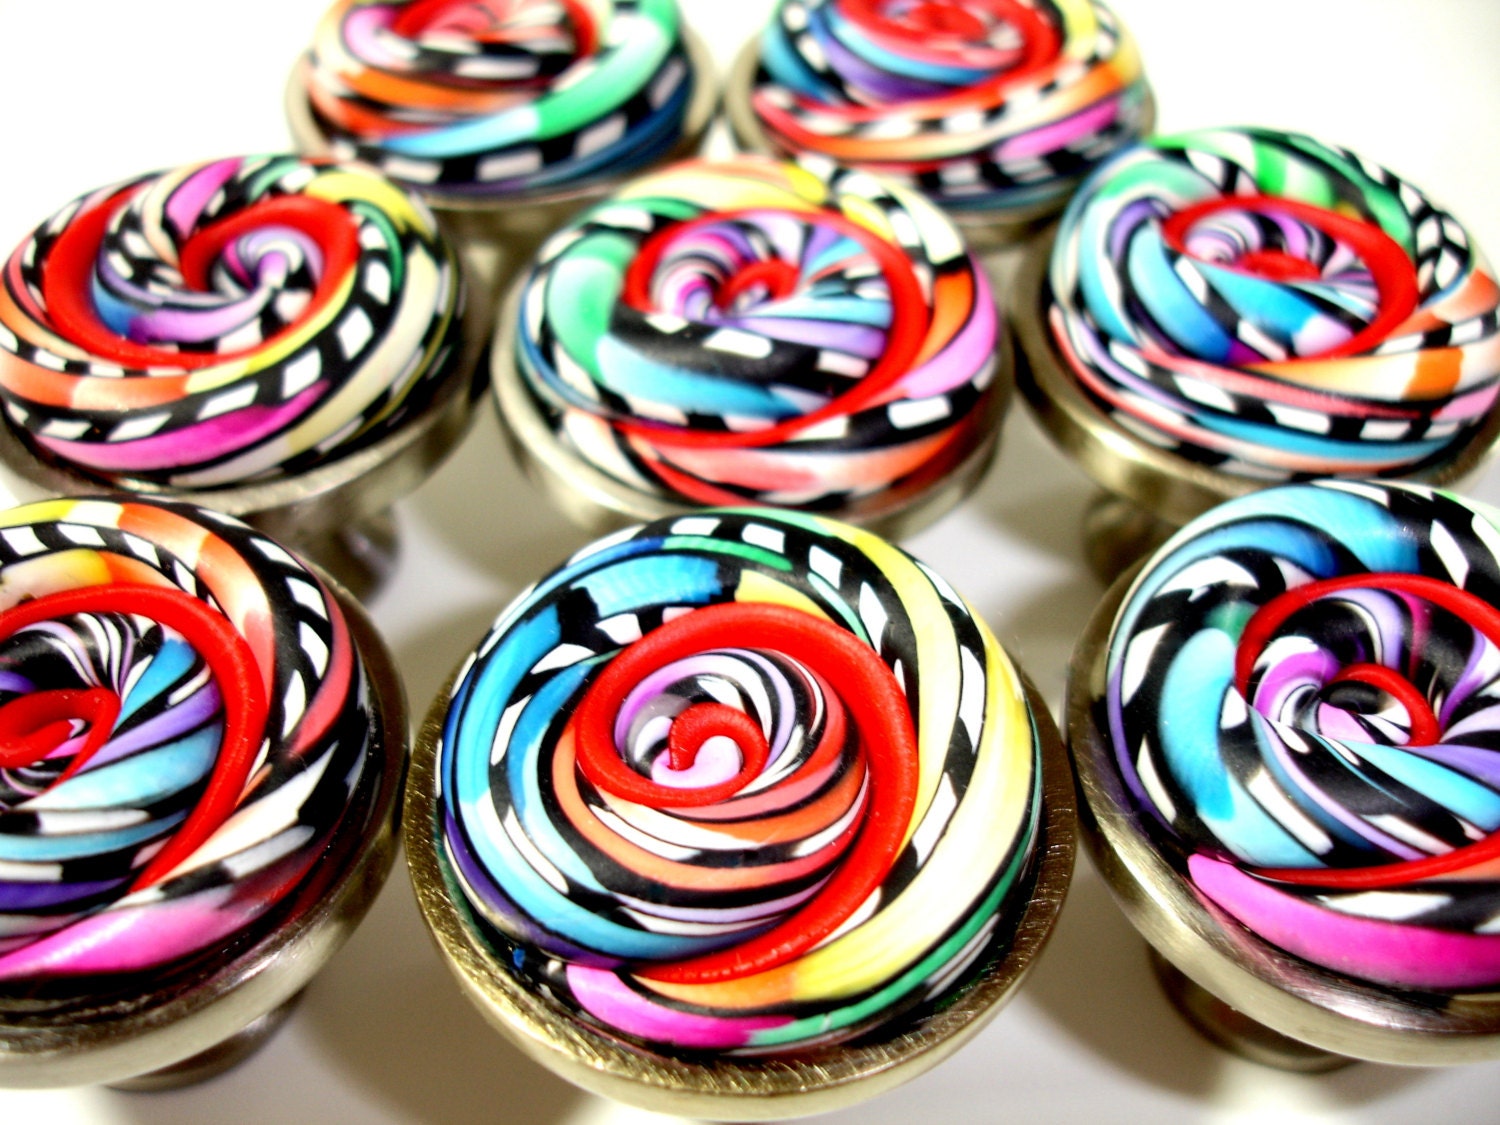 Set of 8 Bright Whimsical Knobs by Outrageous Knobs